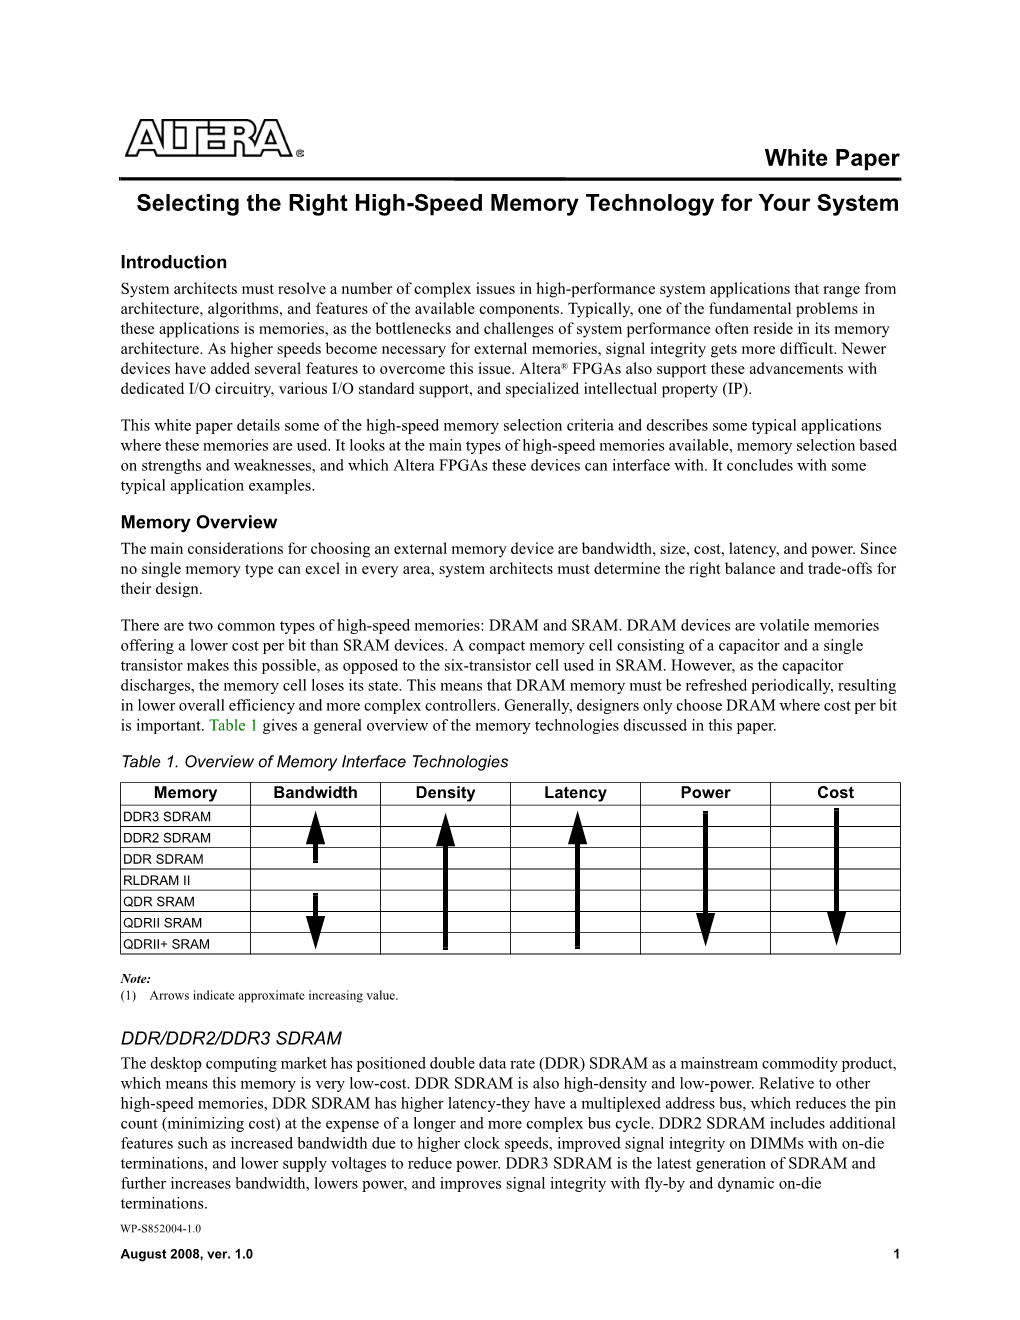 Selecting the Right High-Speed Memory Technology for Your System